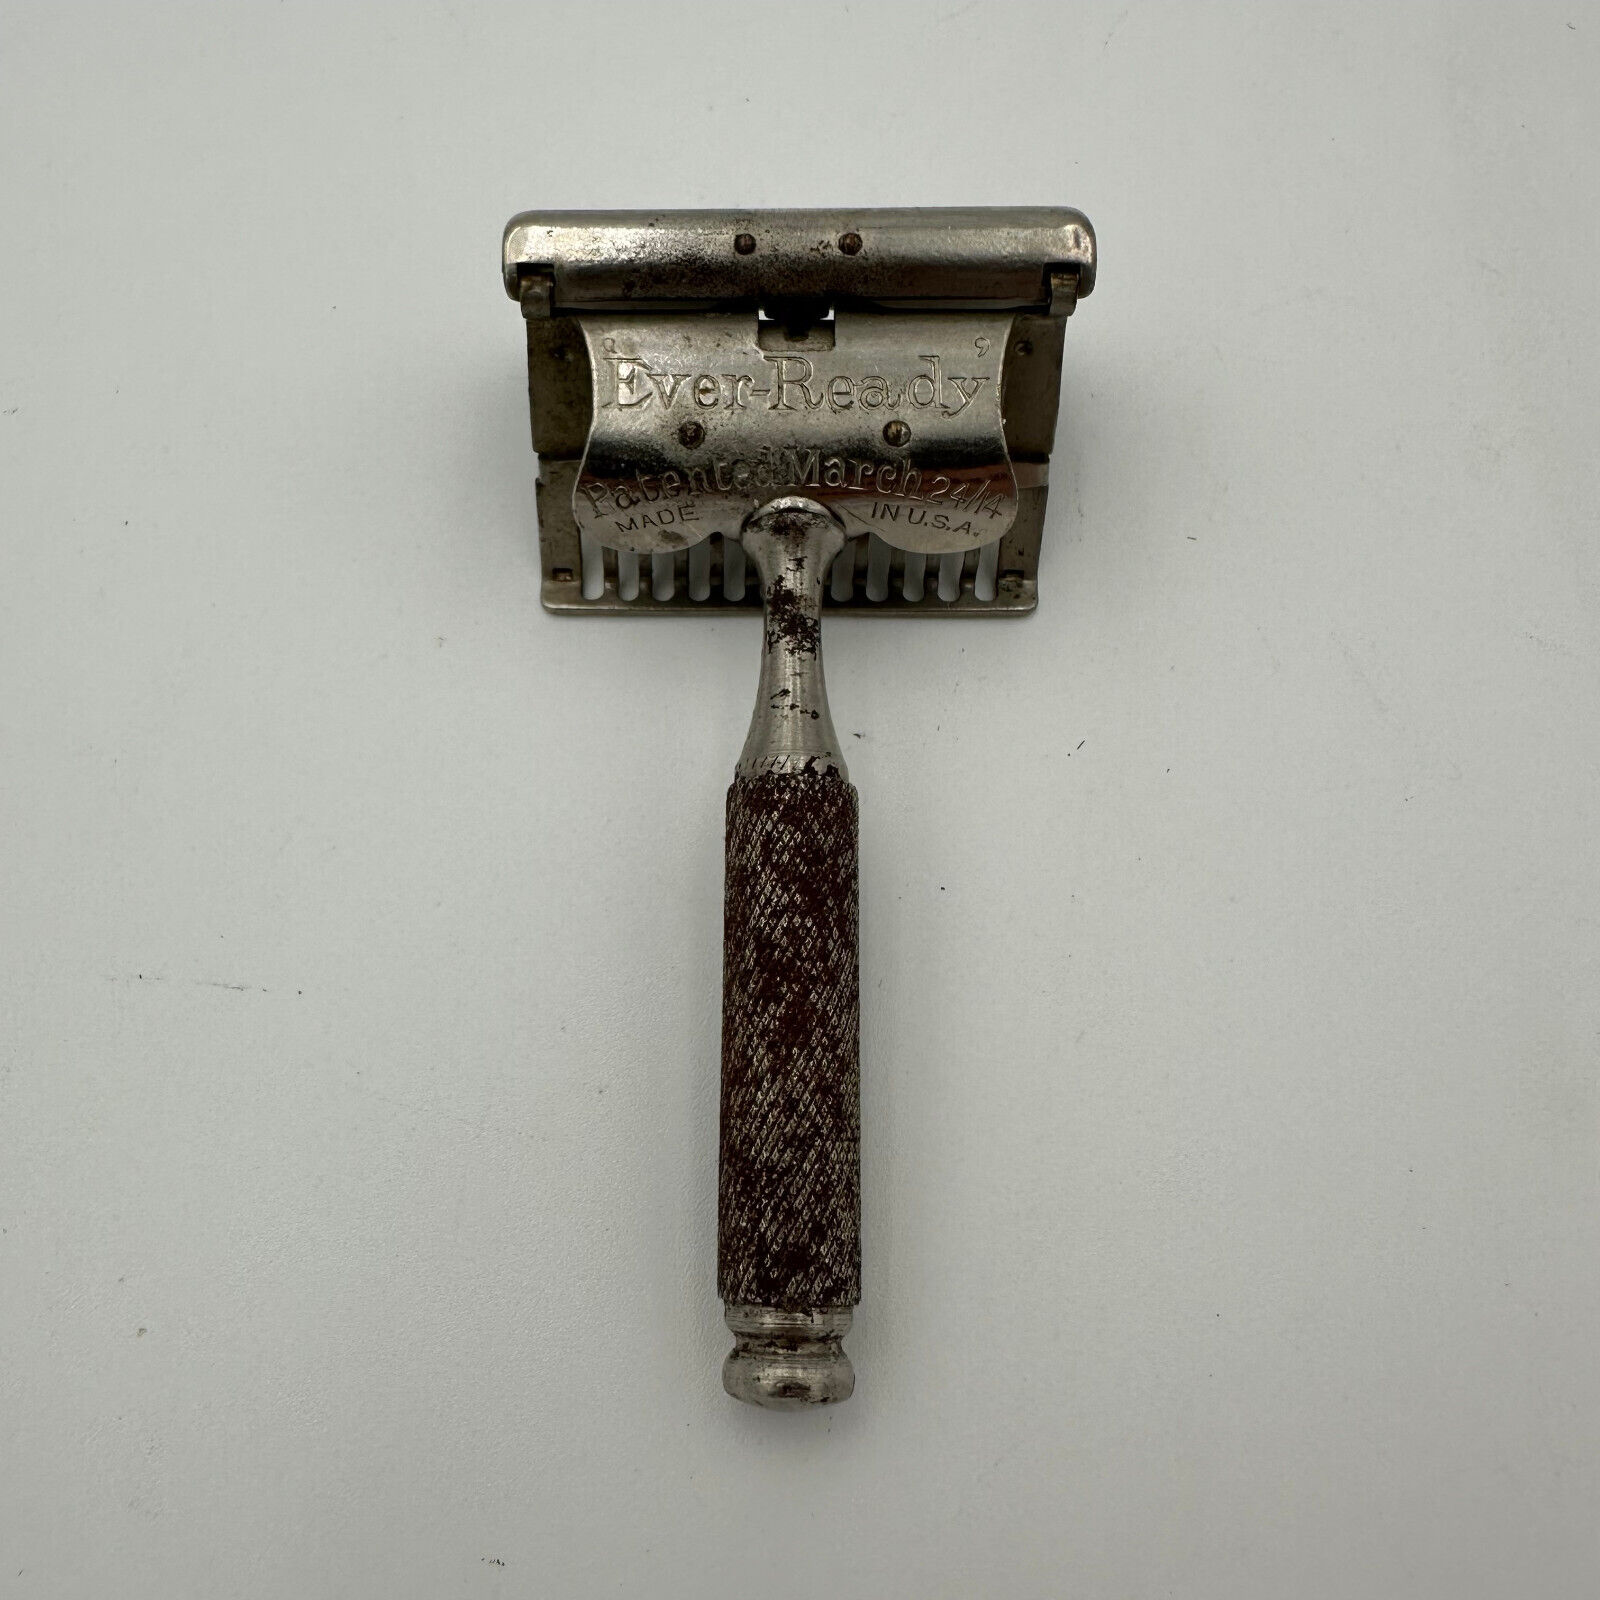 Vintage American Safety Razor Co - Ever-Ready Patented March 24, 1914  New York